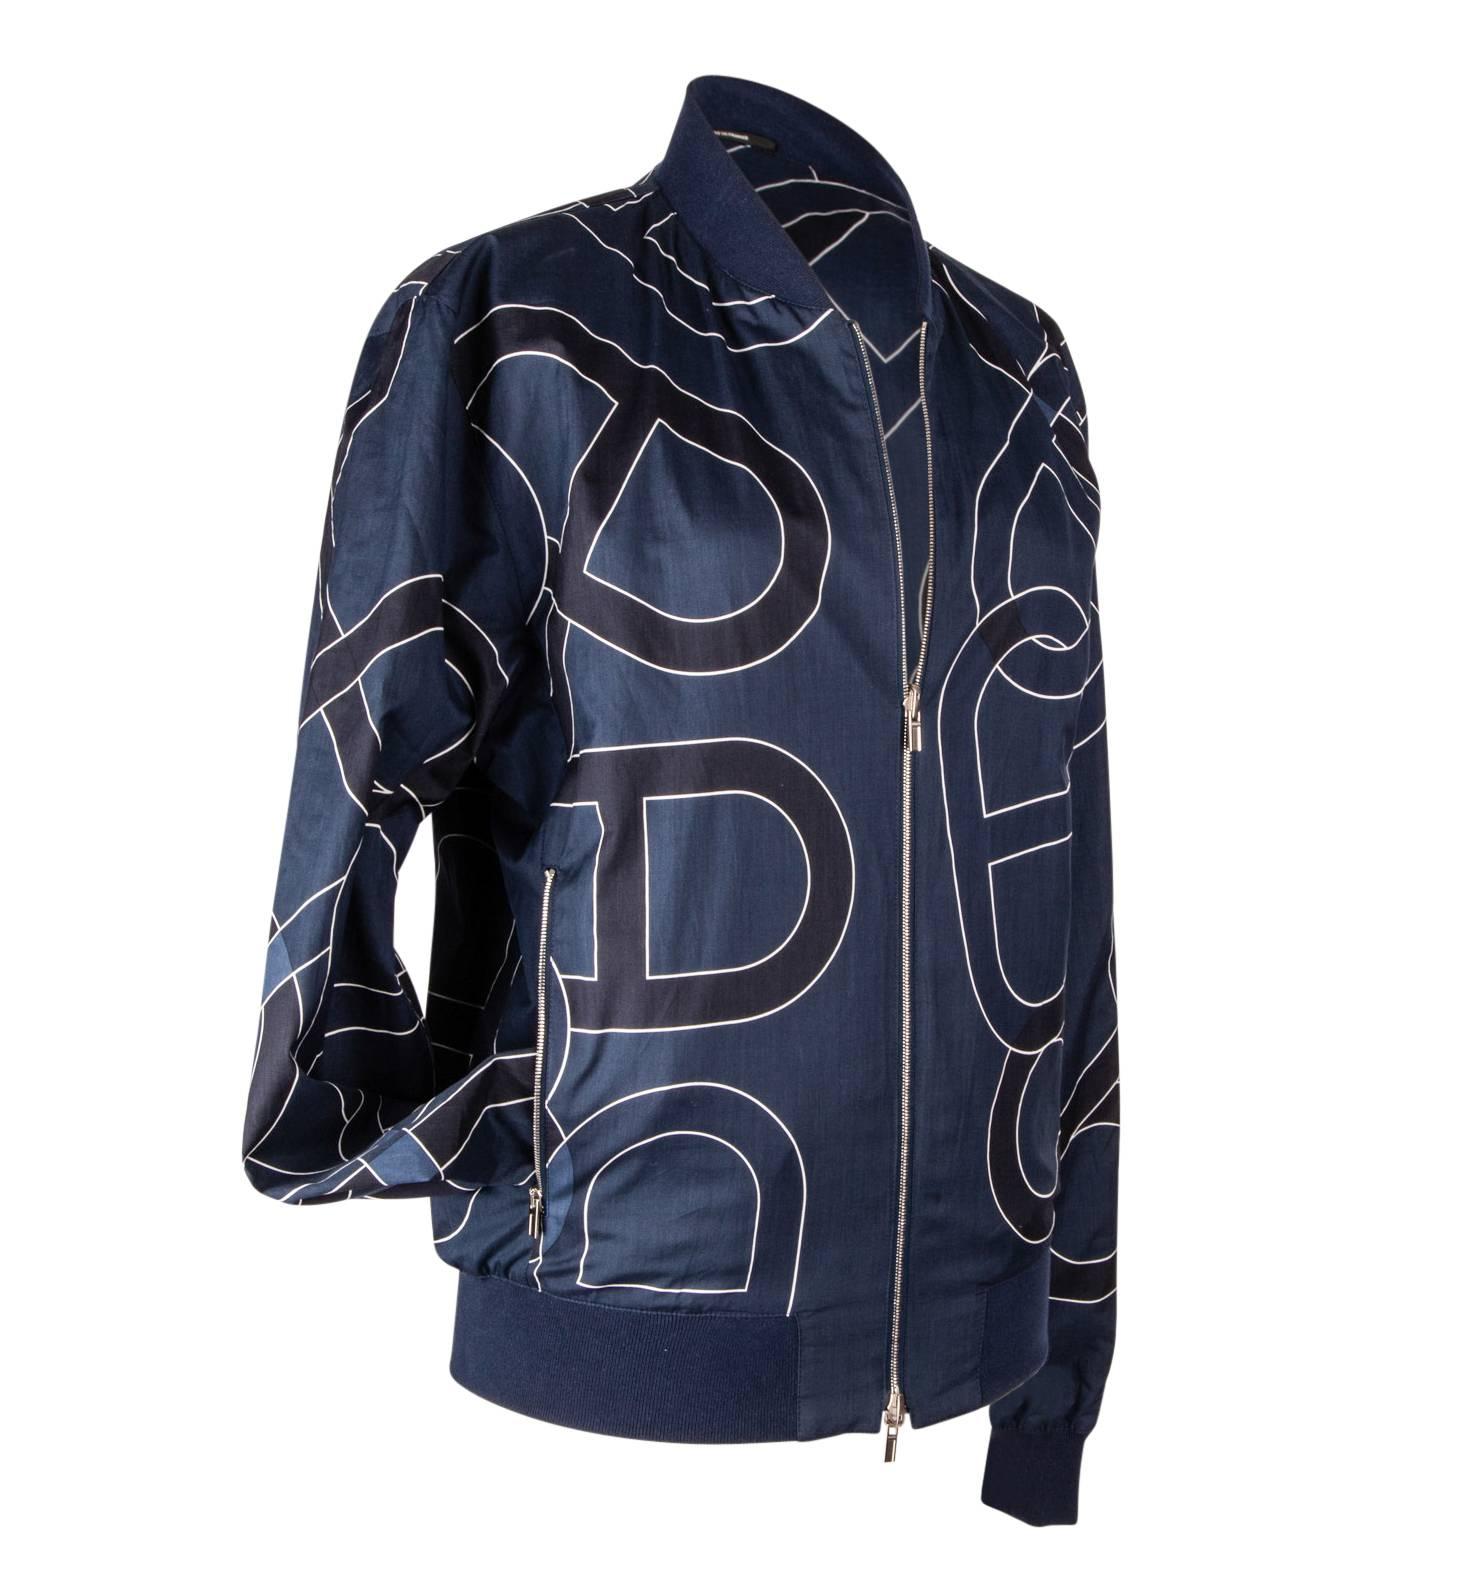 Mightychic offers an Hermes feather light chic reversible men's windbreaker.  
Blue windbreaker reverses to a black and blue Chaine d'Ancre print.
Jacket has zips on both sides with embossed pulls.
Cuffs, waistband and collar are knit. 
NEW or NEVER